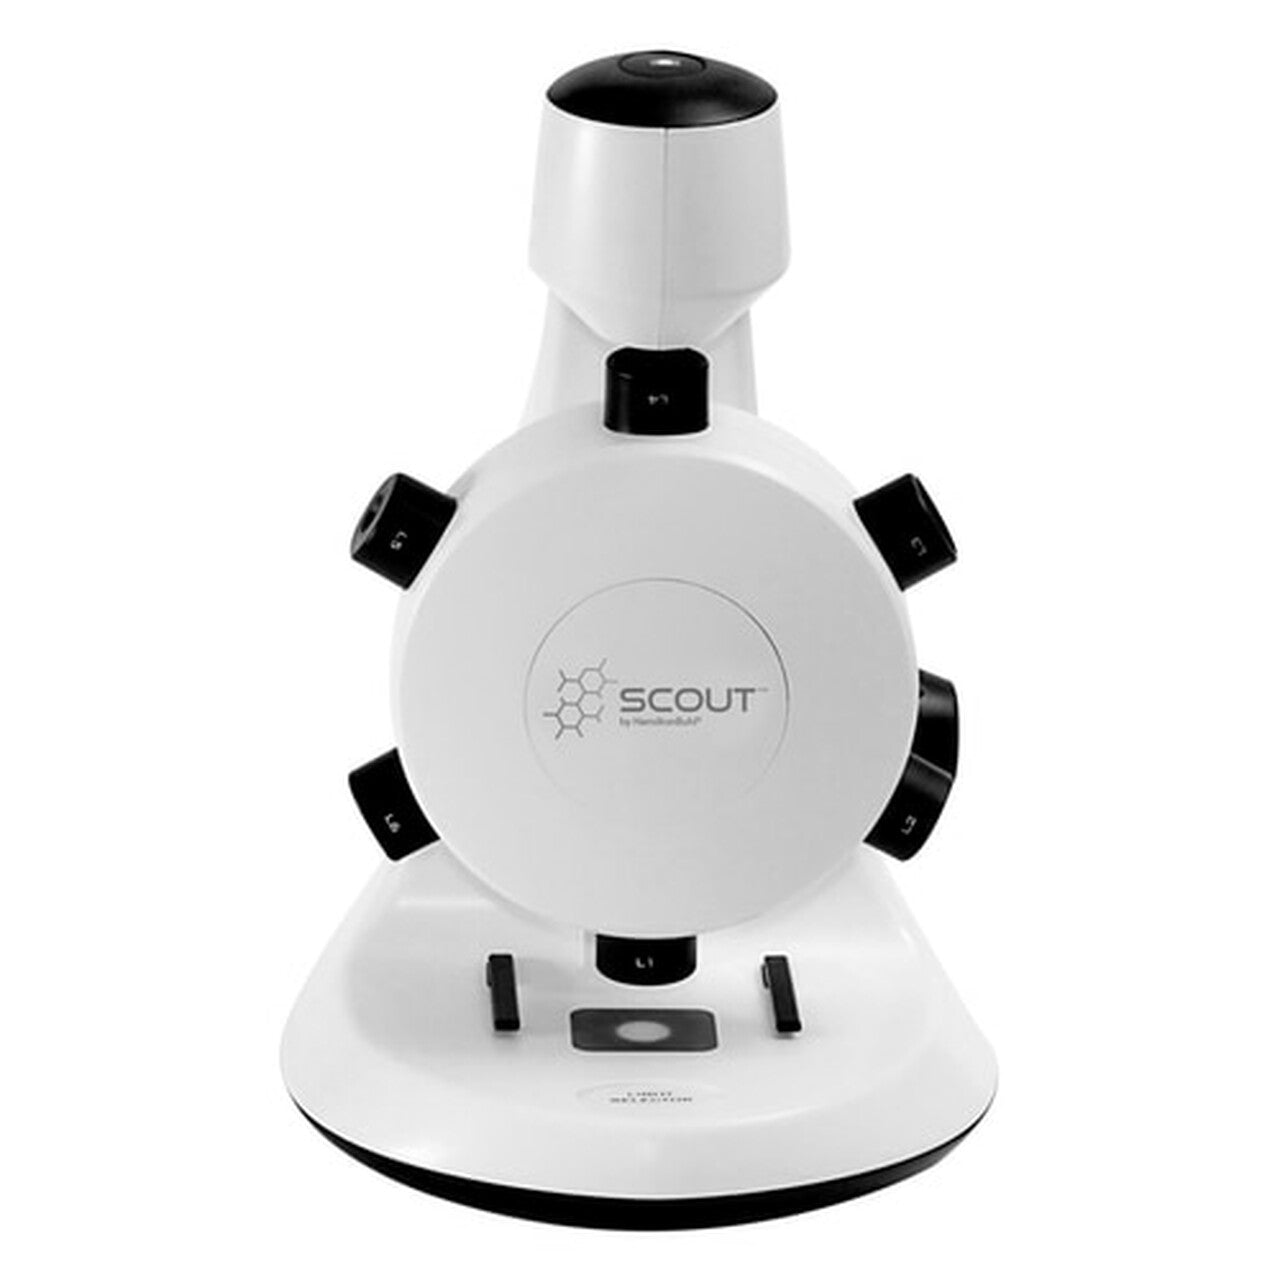 Scout™ Digital Microscope – STEM Microscope with Six Magnification Lenses and Slides - ARVRedtech.com | AR & VR Education Technology